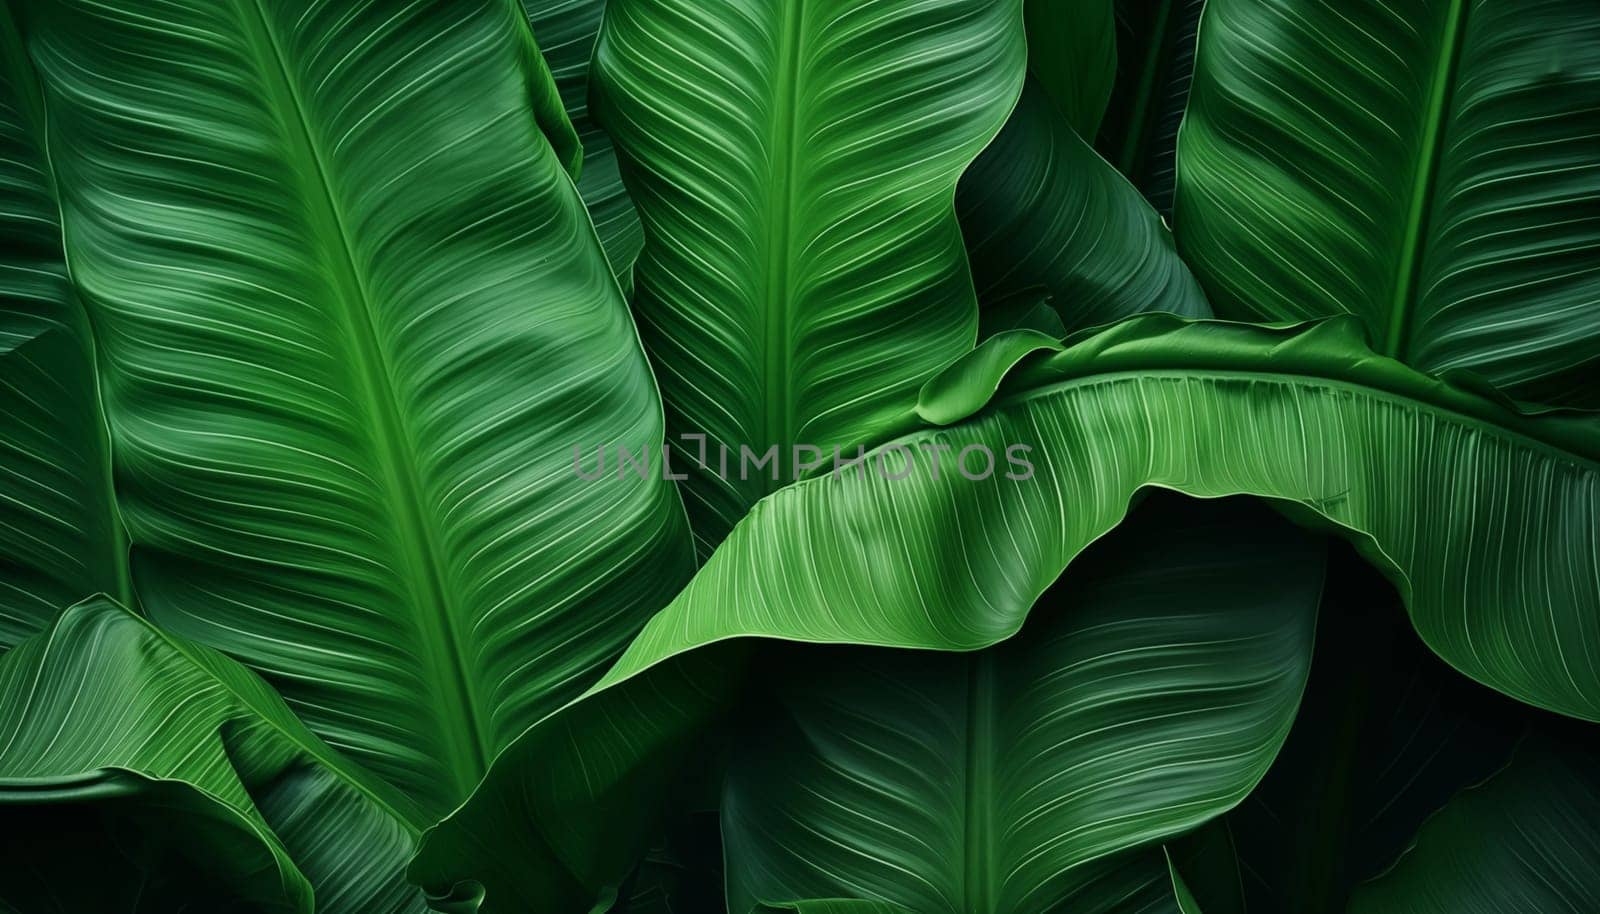 Abstract green leaf texture nature background by Nadtochiy